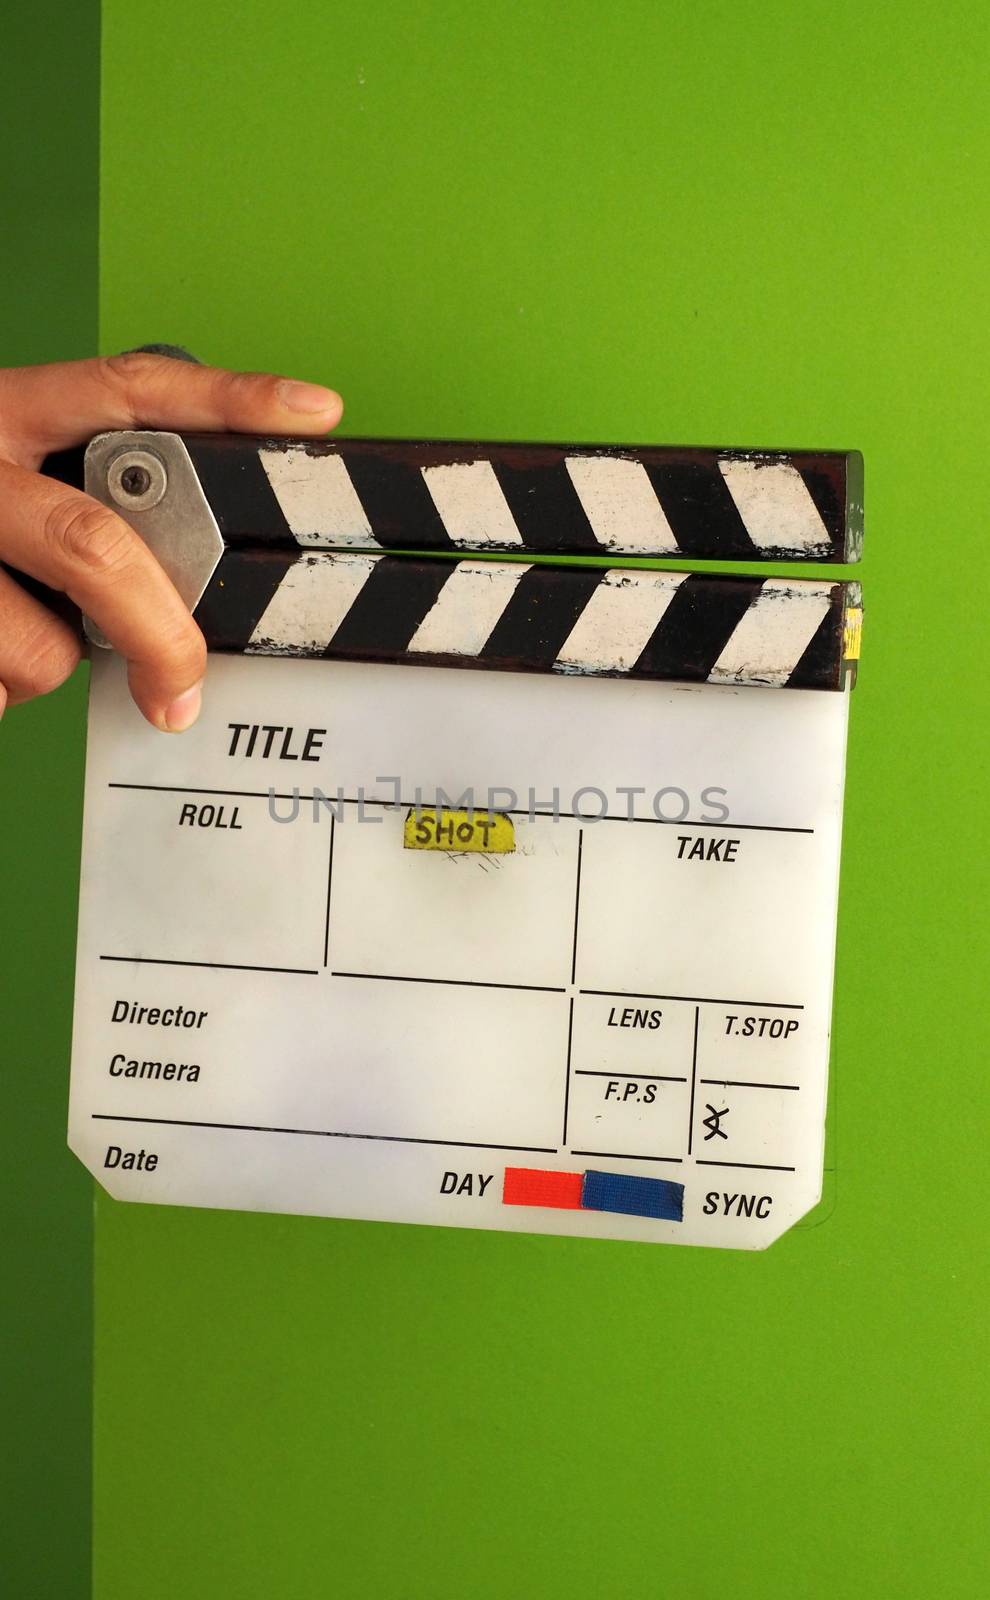 Movie slate board or clapper board and man hand and white color and green screen background in studio.